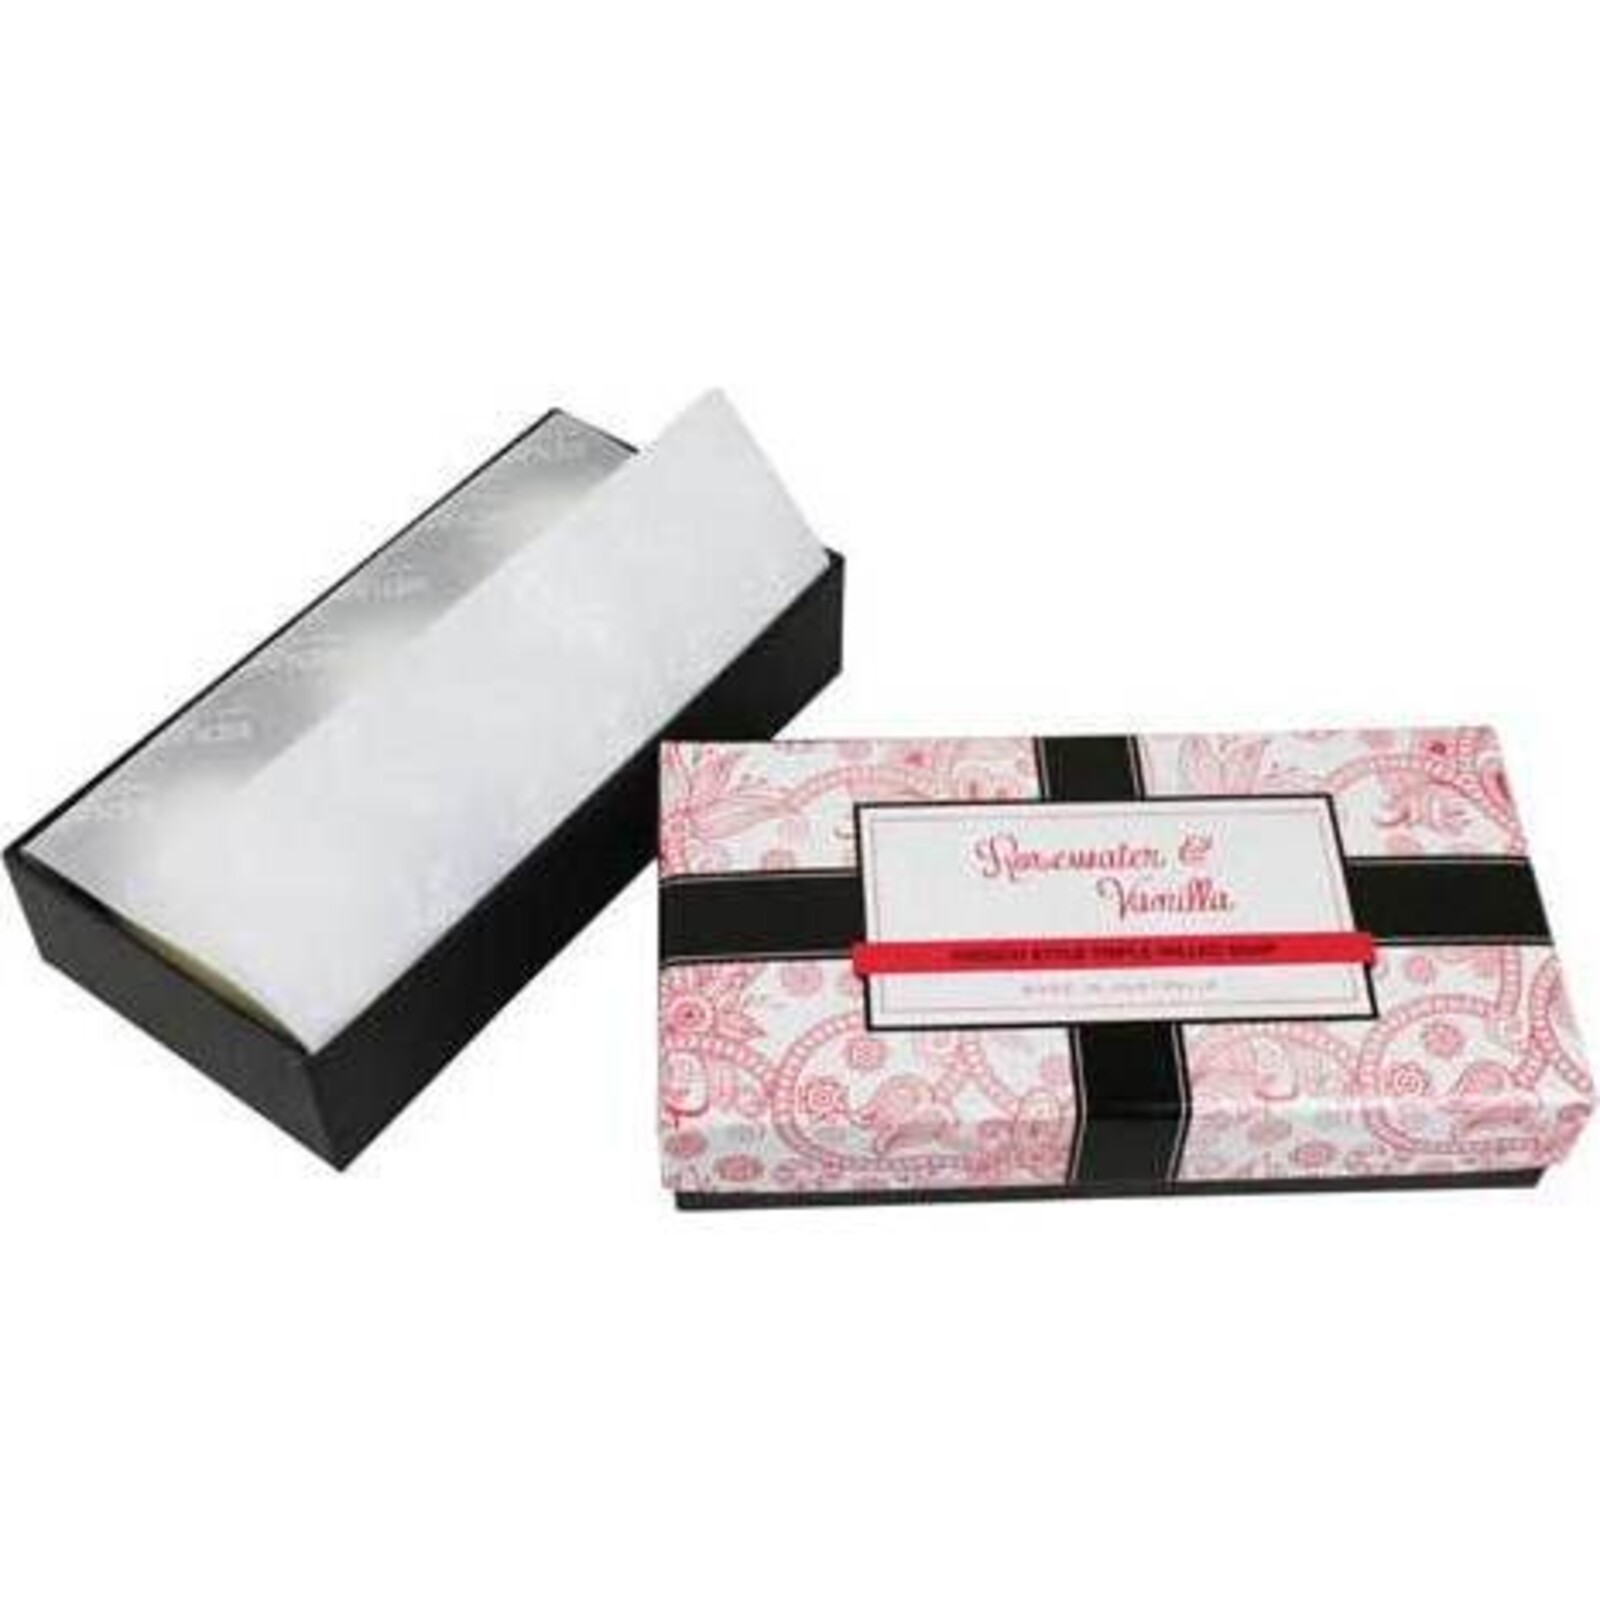 Rosewater and Vanilla Boxed Soap  S/3 